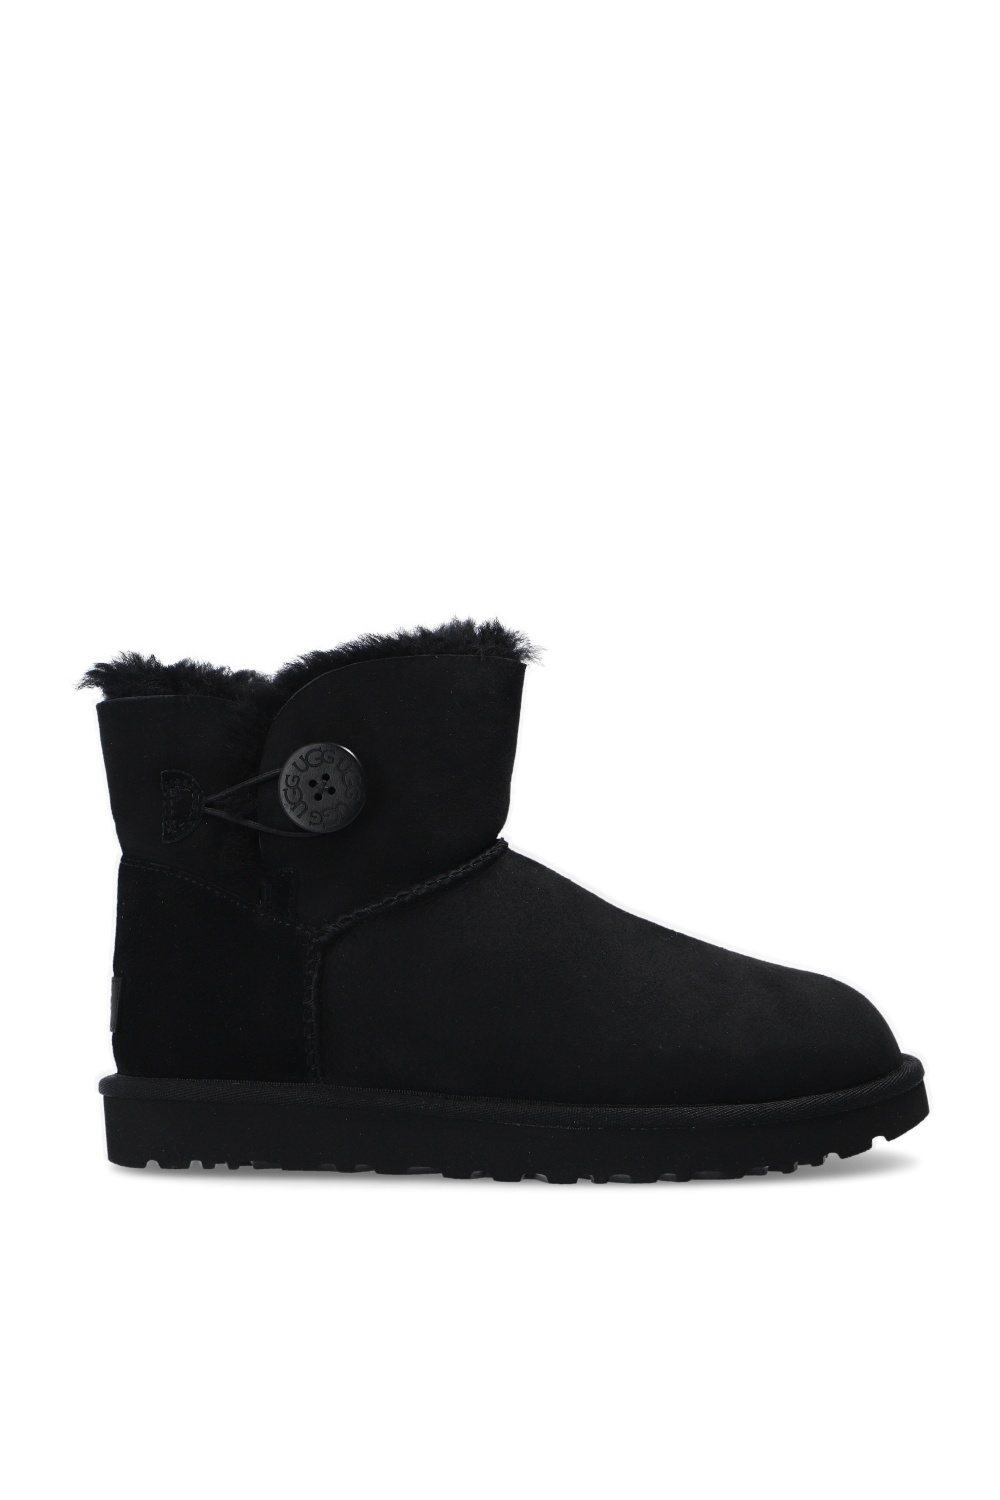 UGG 'Mini Bailey Button II' suede snow boots